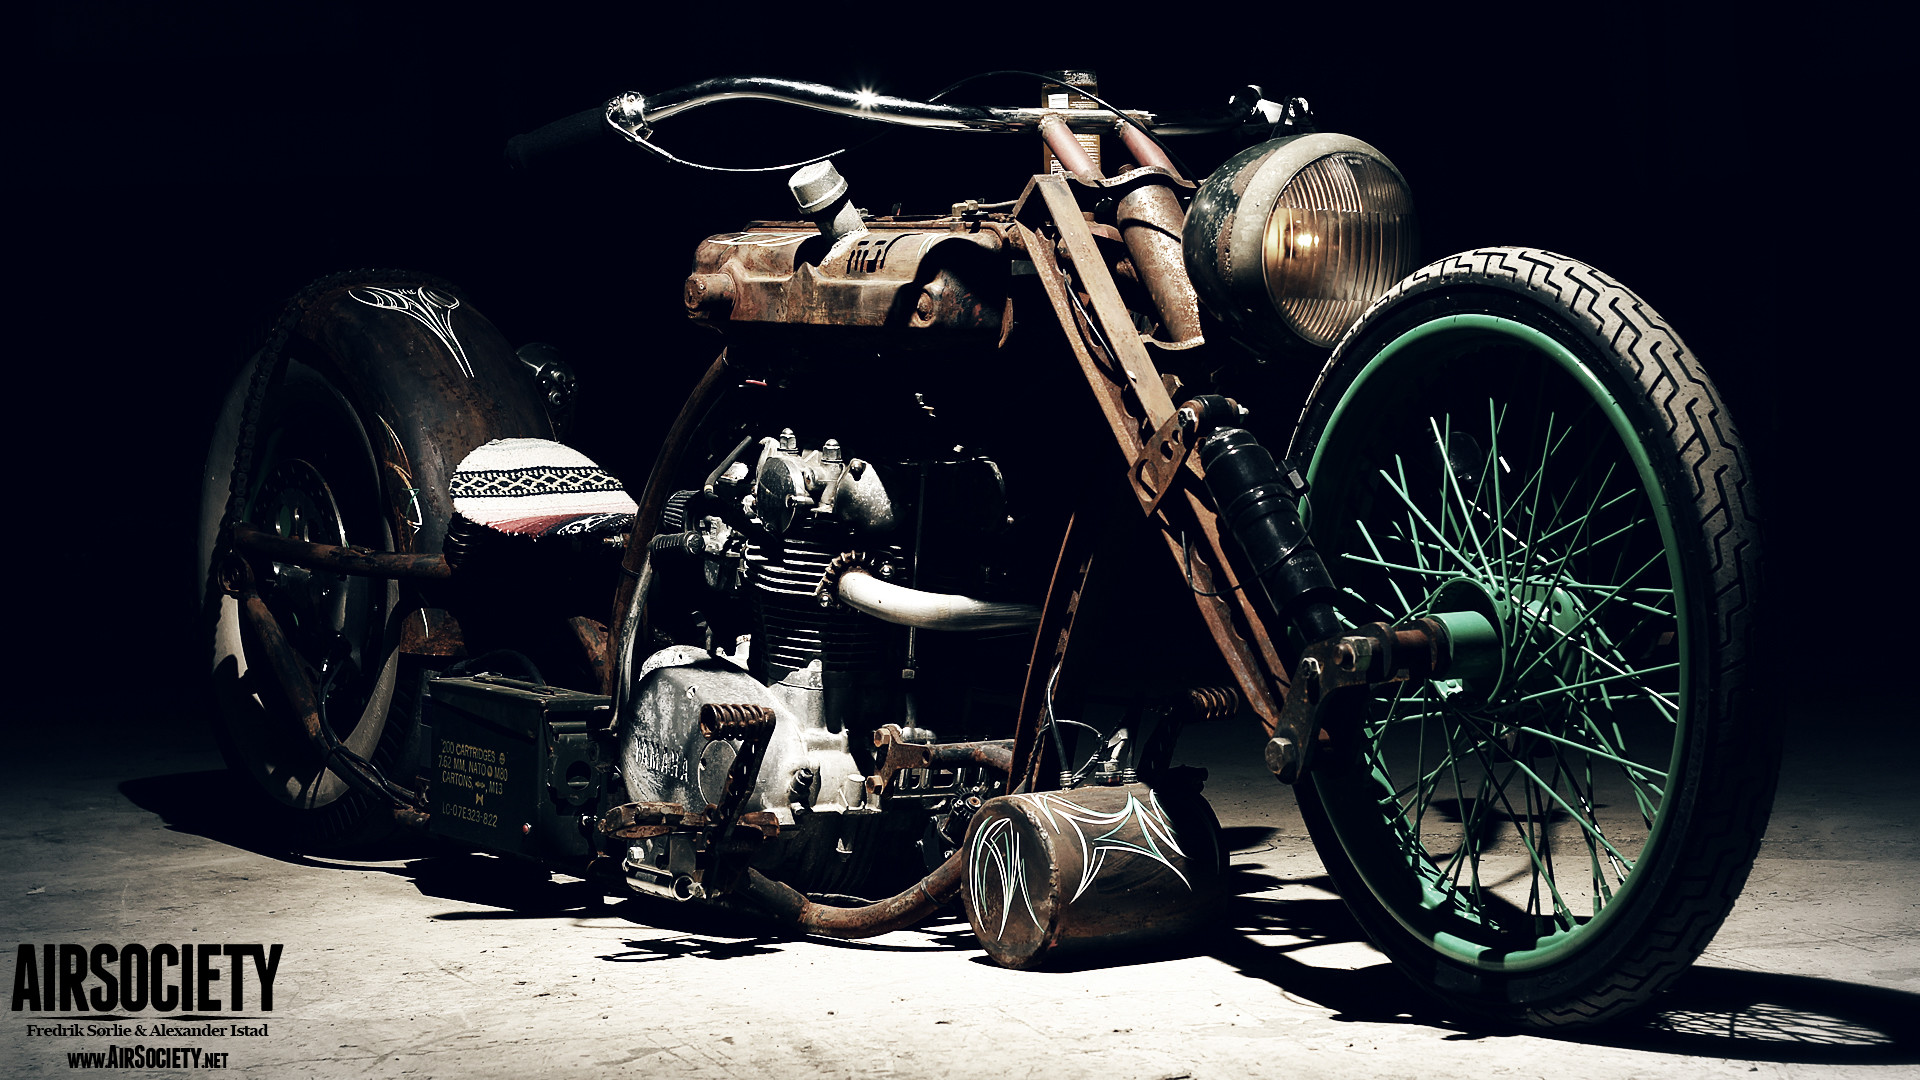 1920x1080 Search Results for “bike chopper wallpaper” – Adorable Wallpapers